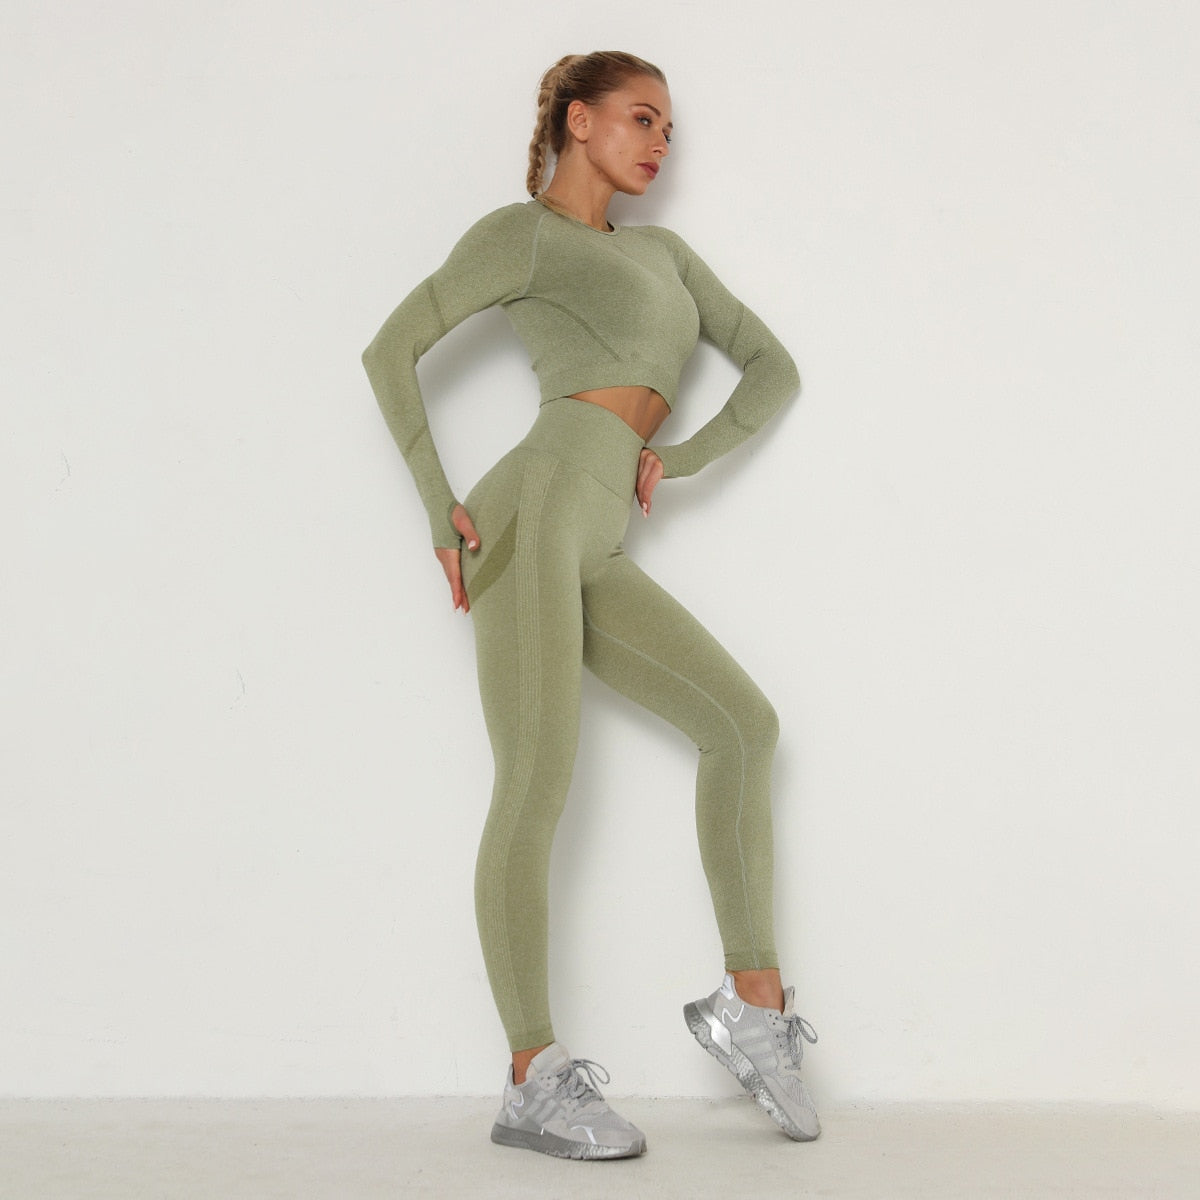 Yoga suit Seamless Long sleeve female Crop Top High Waist Vitality Quick Dry Peach Hip Leggings gym workout clothes